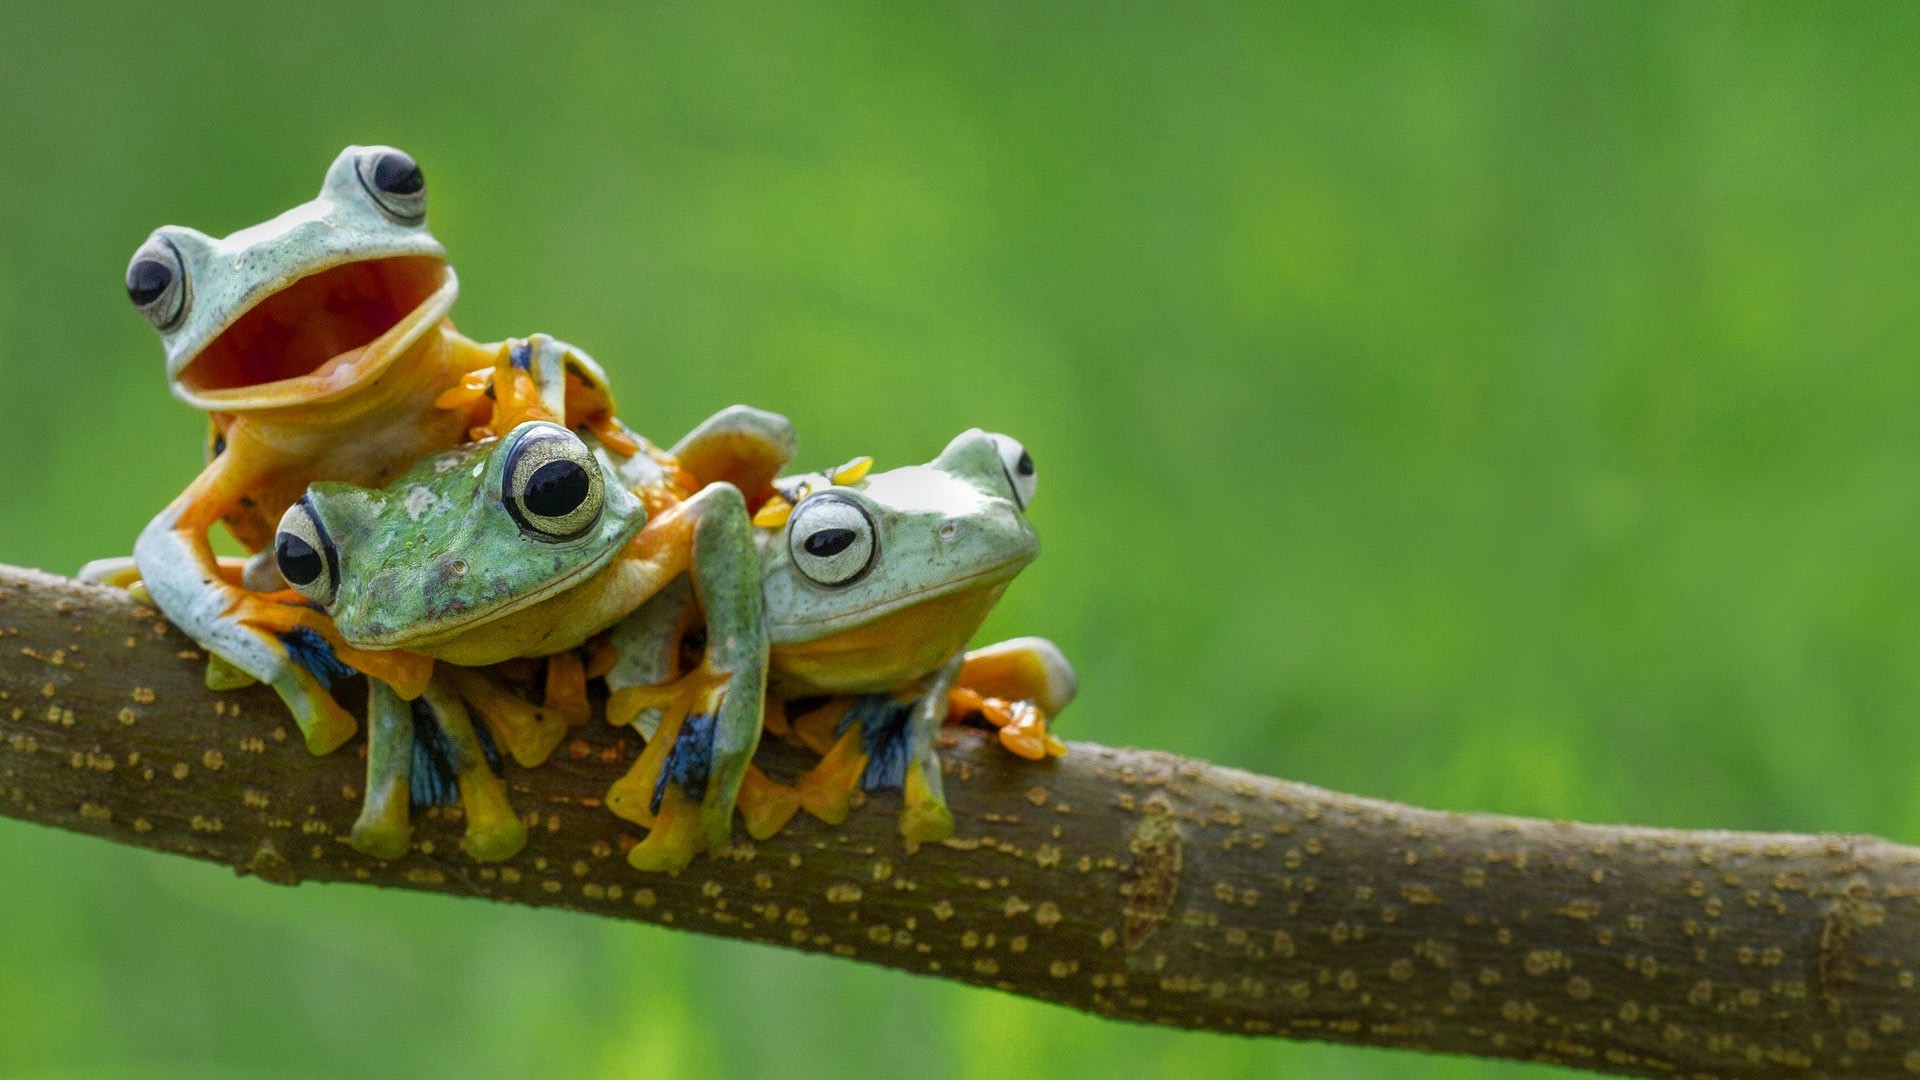 General 1920x1080 nature frog amphibian animals green background branch simple background